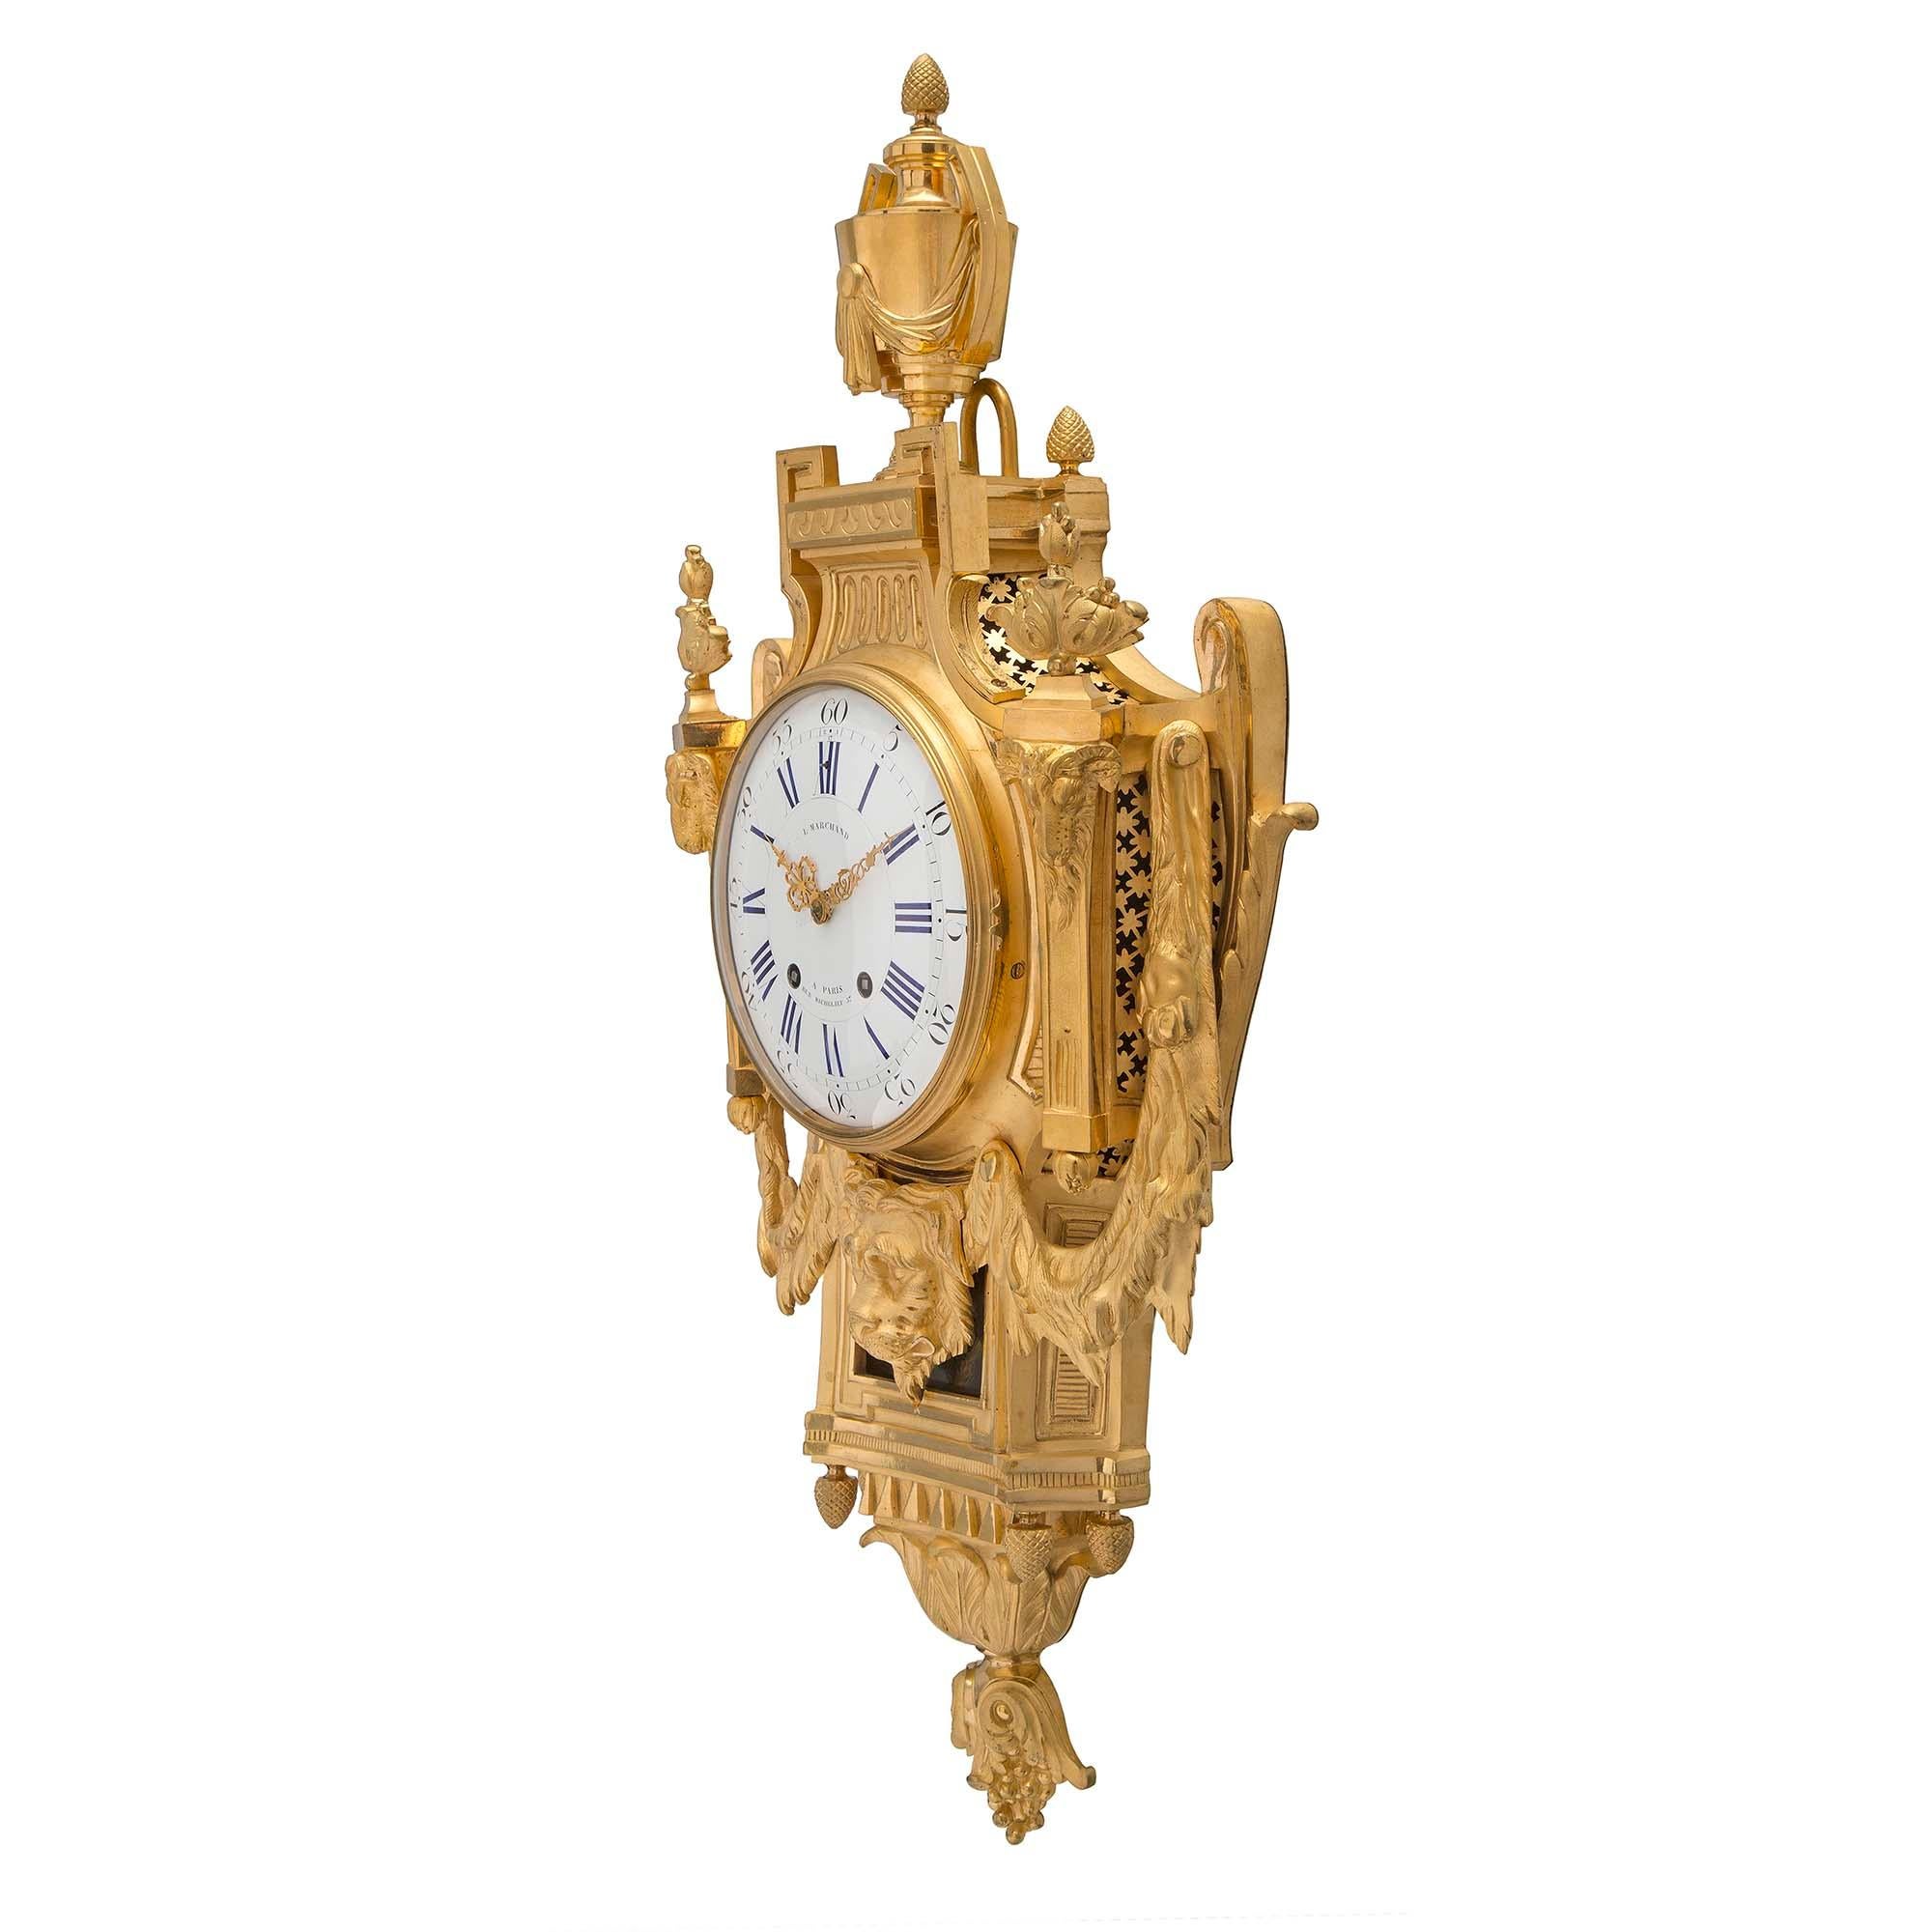 A stunning and high quality French 19th century Louis XVI st. ormolu cartel clock, by L. Marchand. The clock has a a fine berried and foliate bottom inverted finial and finely etched leaves, below four acorn finials. Above is a handsome and